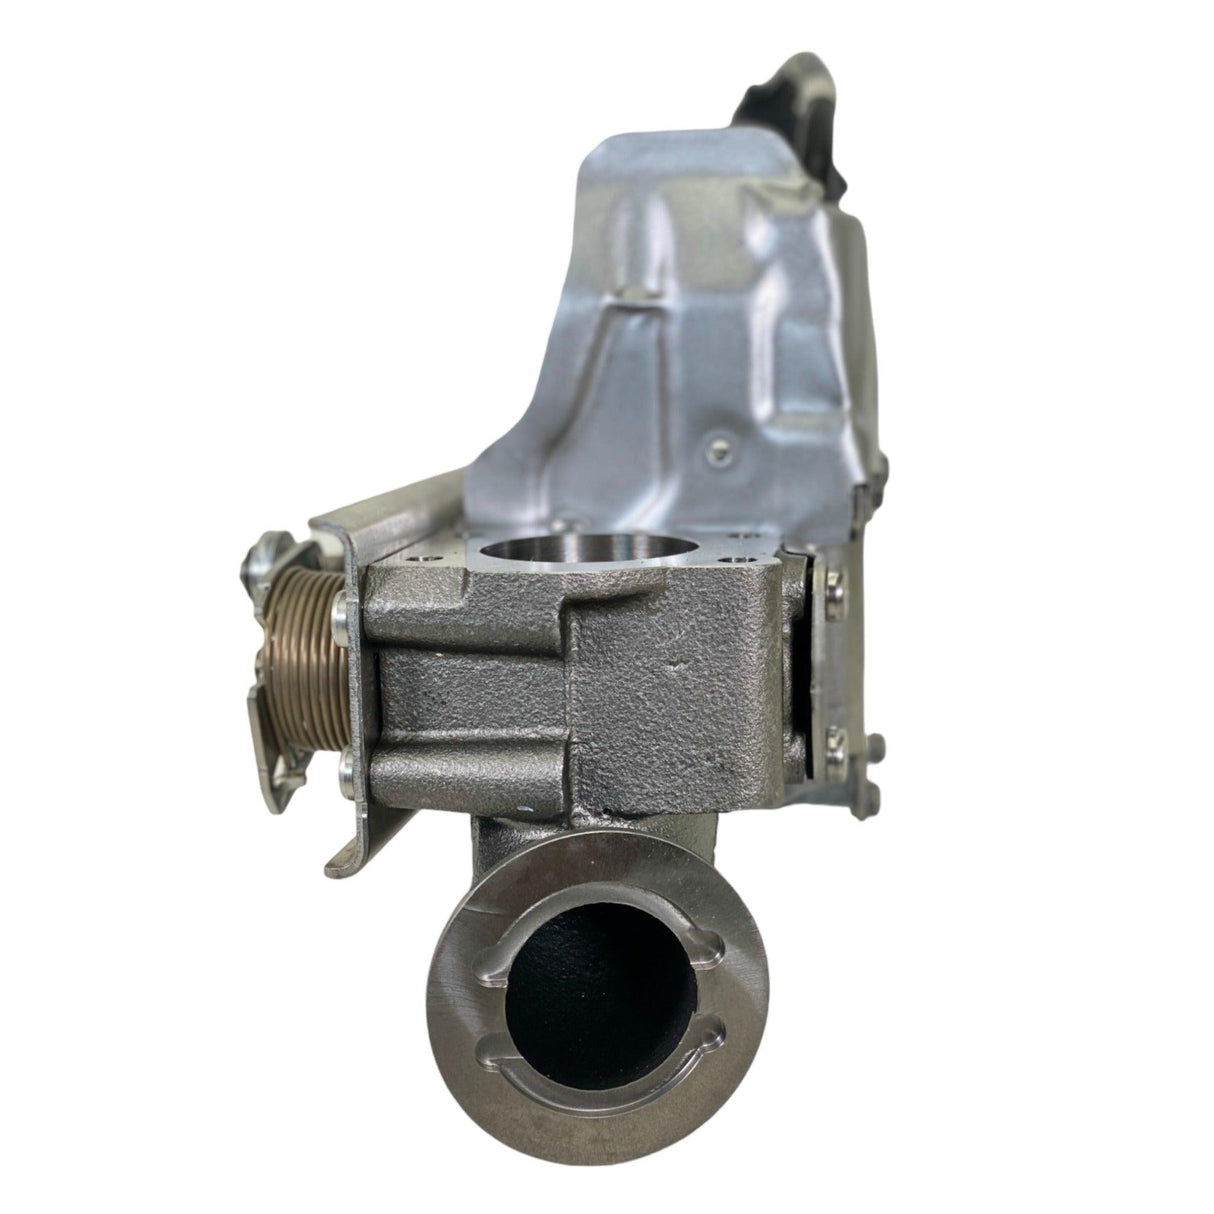 2162359 Genuine Paccar Egr Control Valve For Paccar Engine